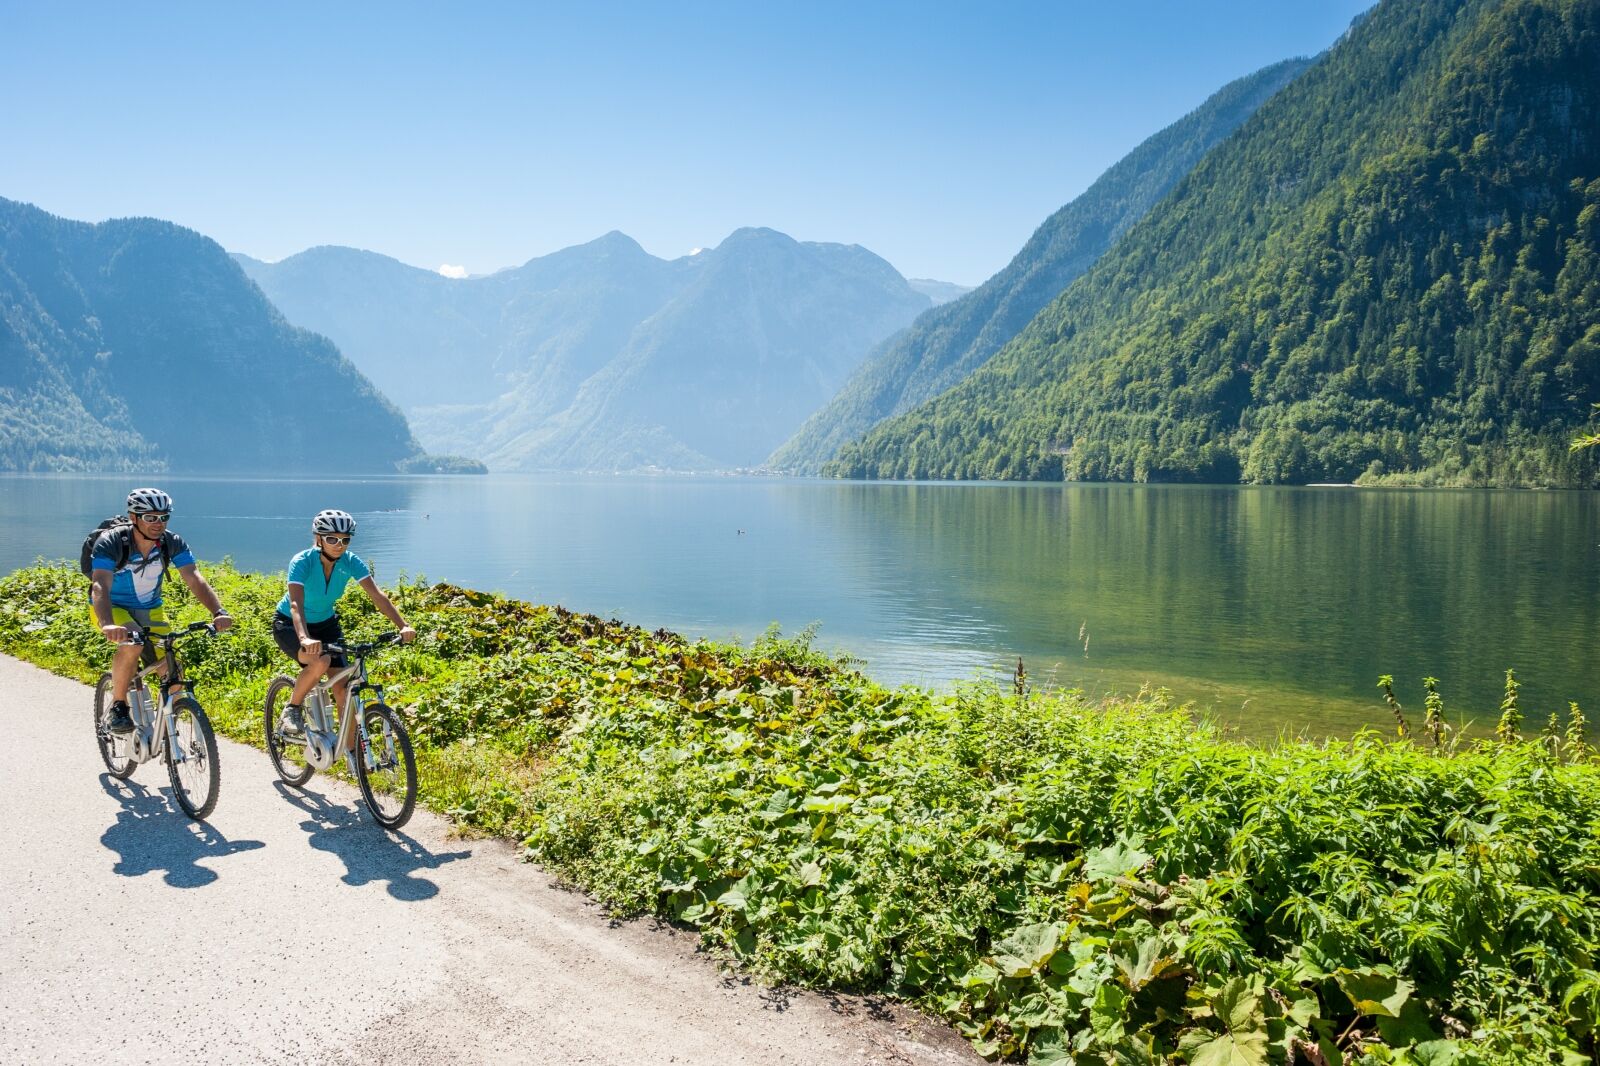 People on bikes at Lake Atter (Attersee) in Austria one of the best lakes in Europe